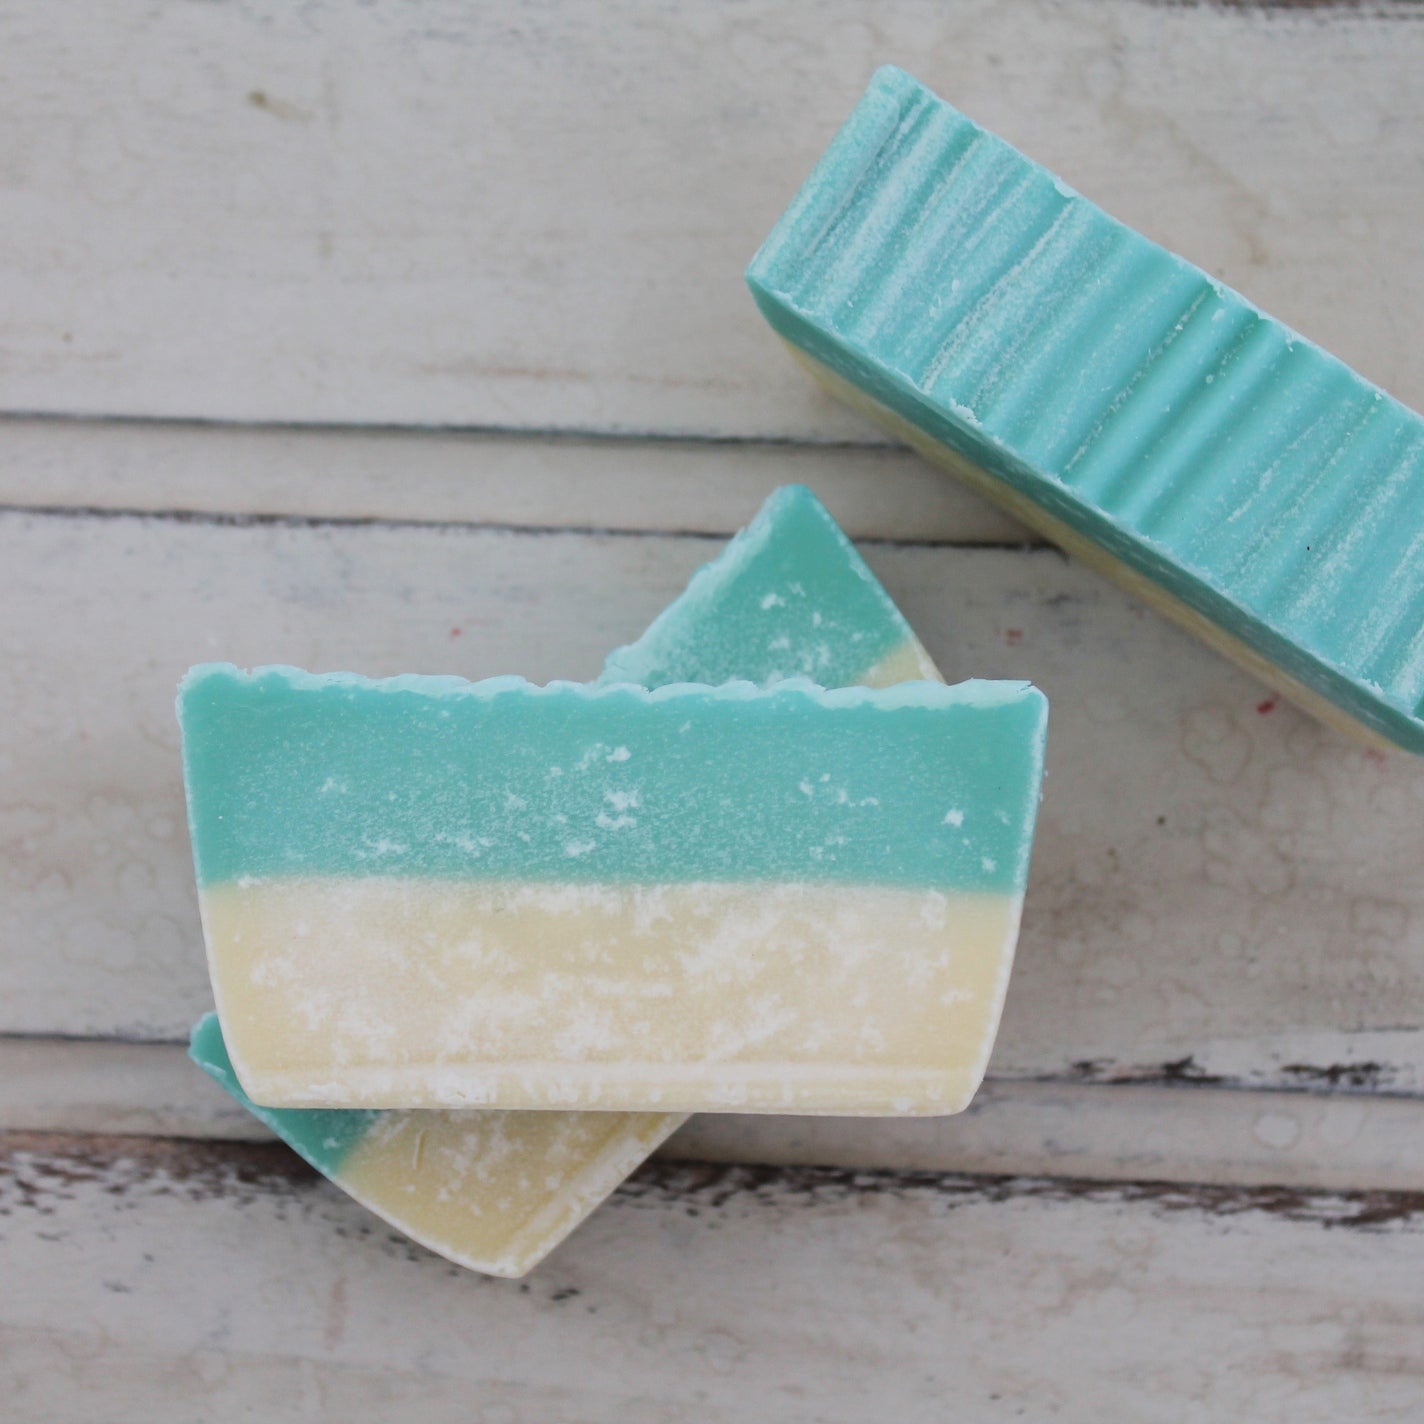 Turquoise and cream layered soap bars on whitewashed wooden background